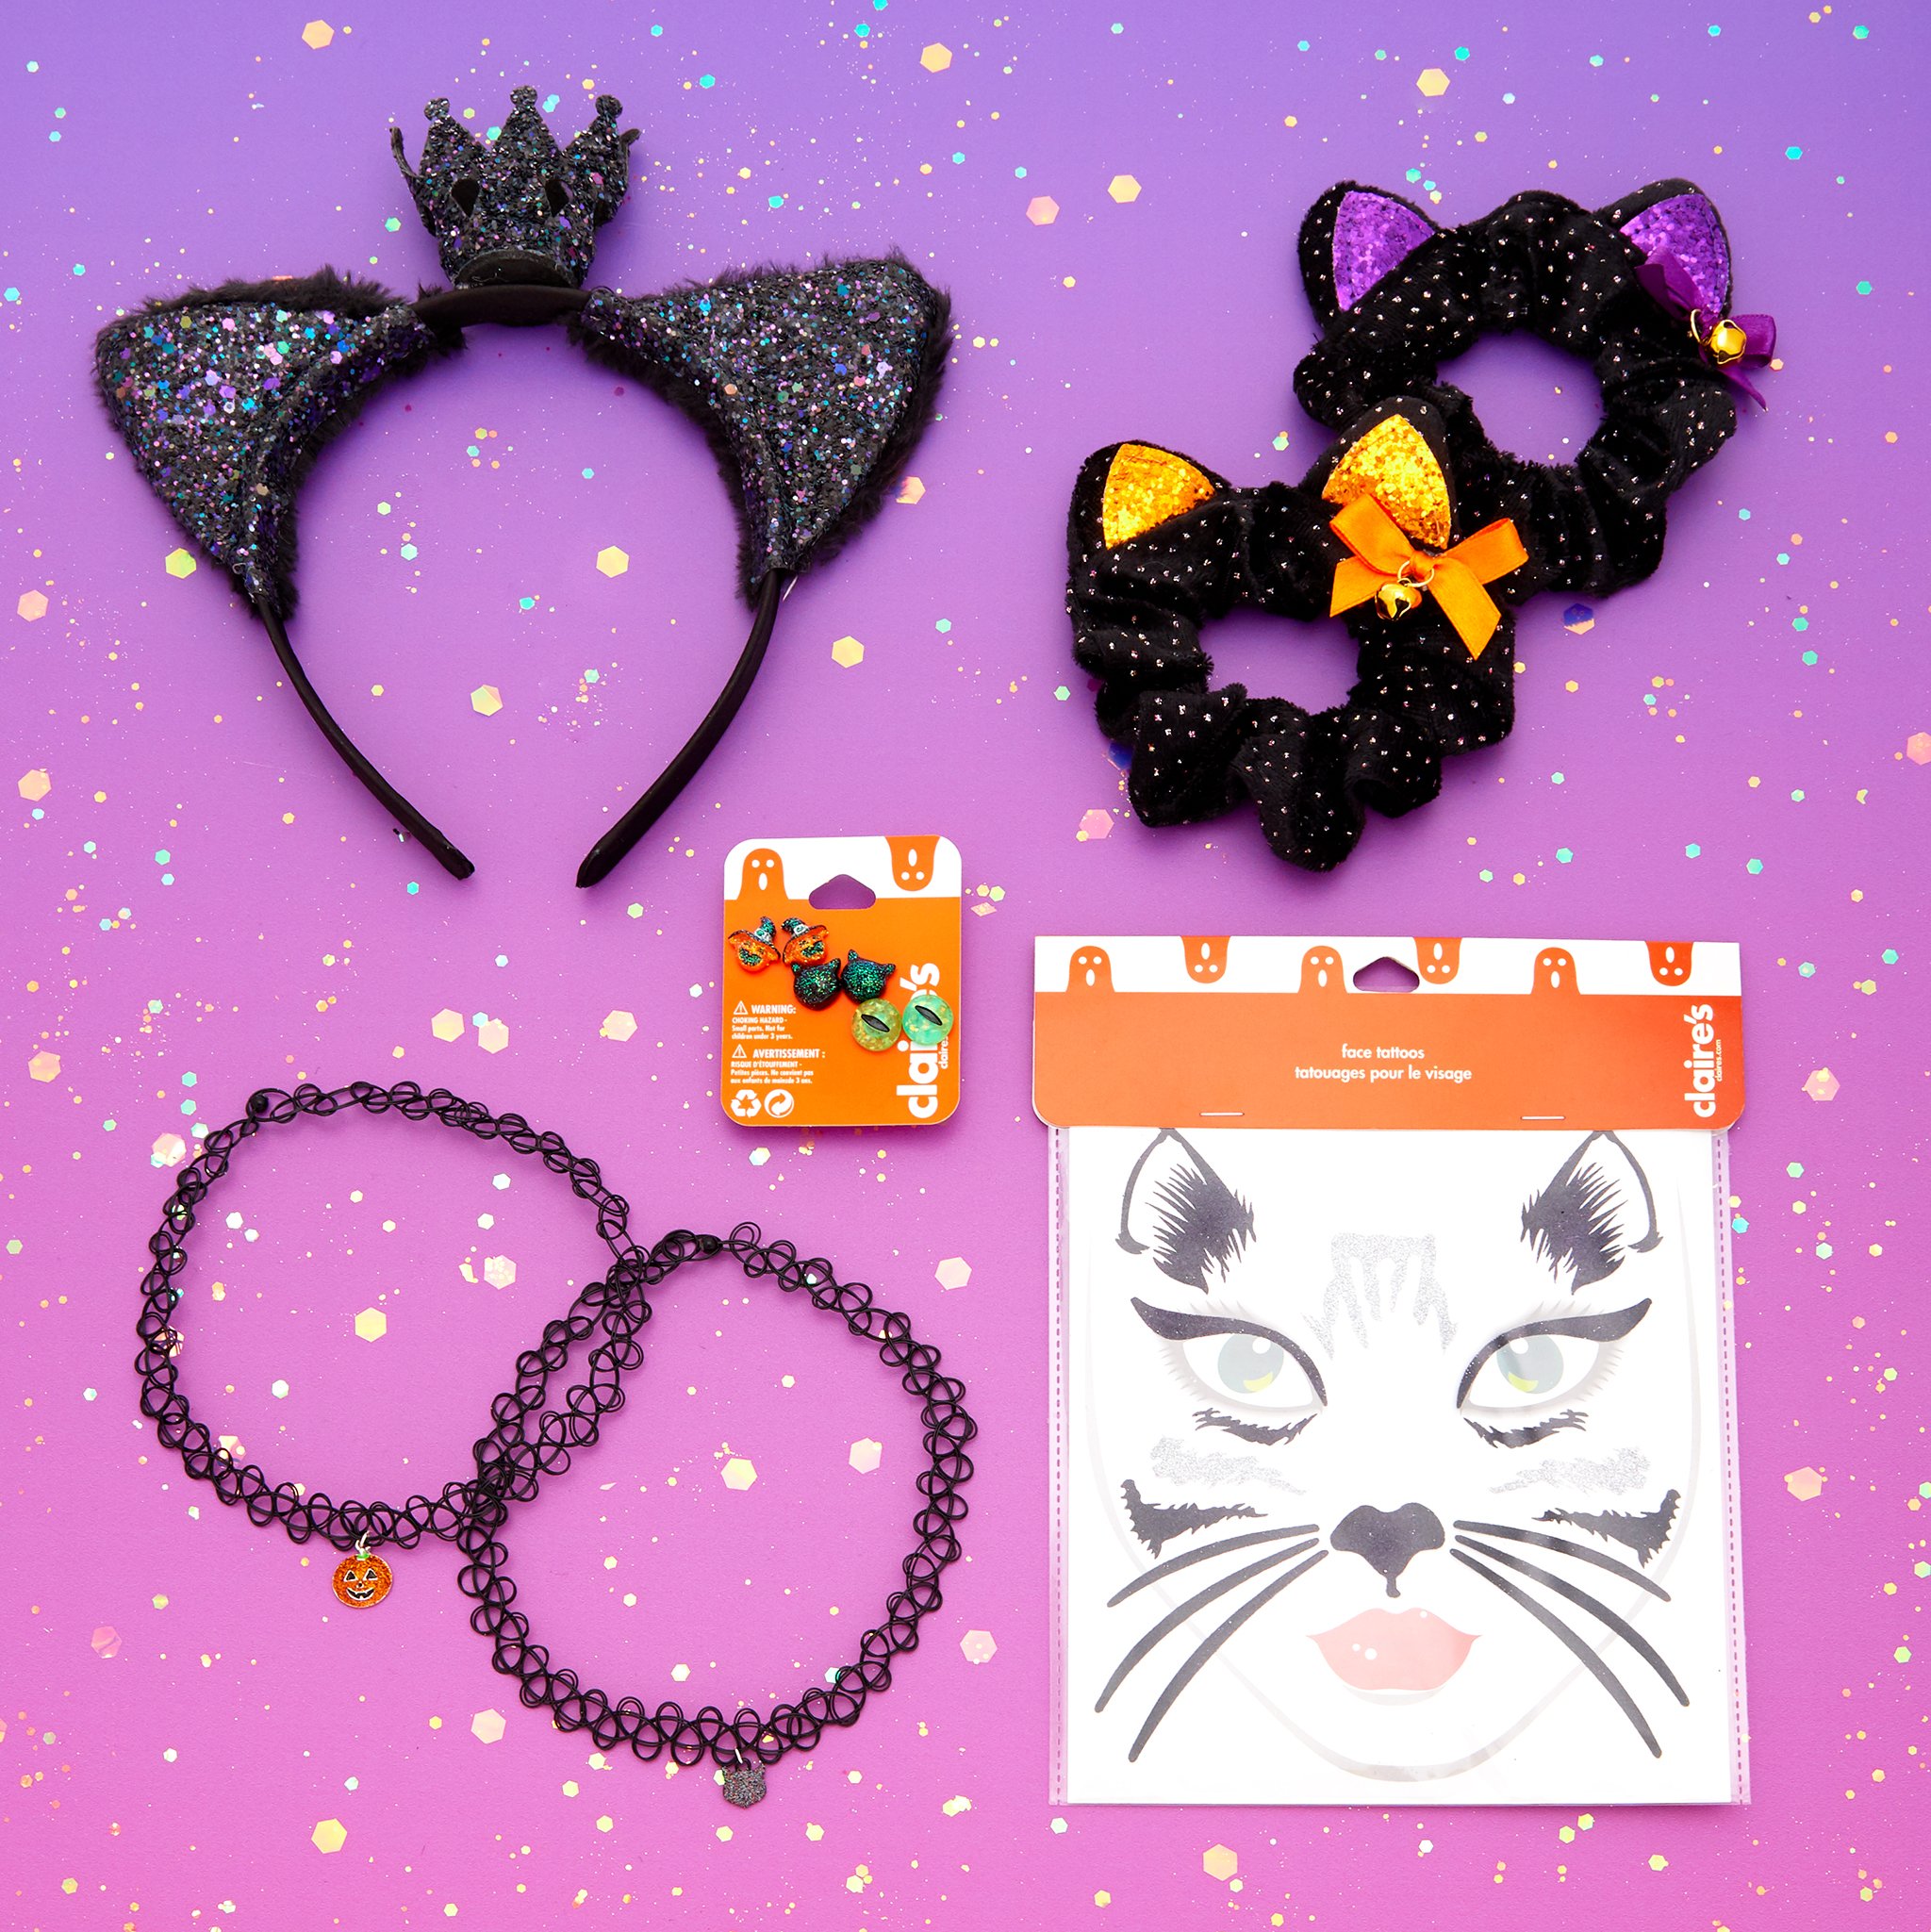 mave tit forhåndsvisning Claire's on Twitter: "Get the purrfect halloween costume and accessories at  Claire's with our cat look 😸👻🎃 Shop in store &amp; online now  #GhoulPower https://t.co/y1uSdG2QaI" / Twitter